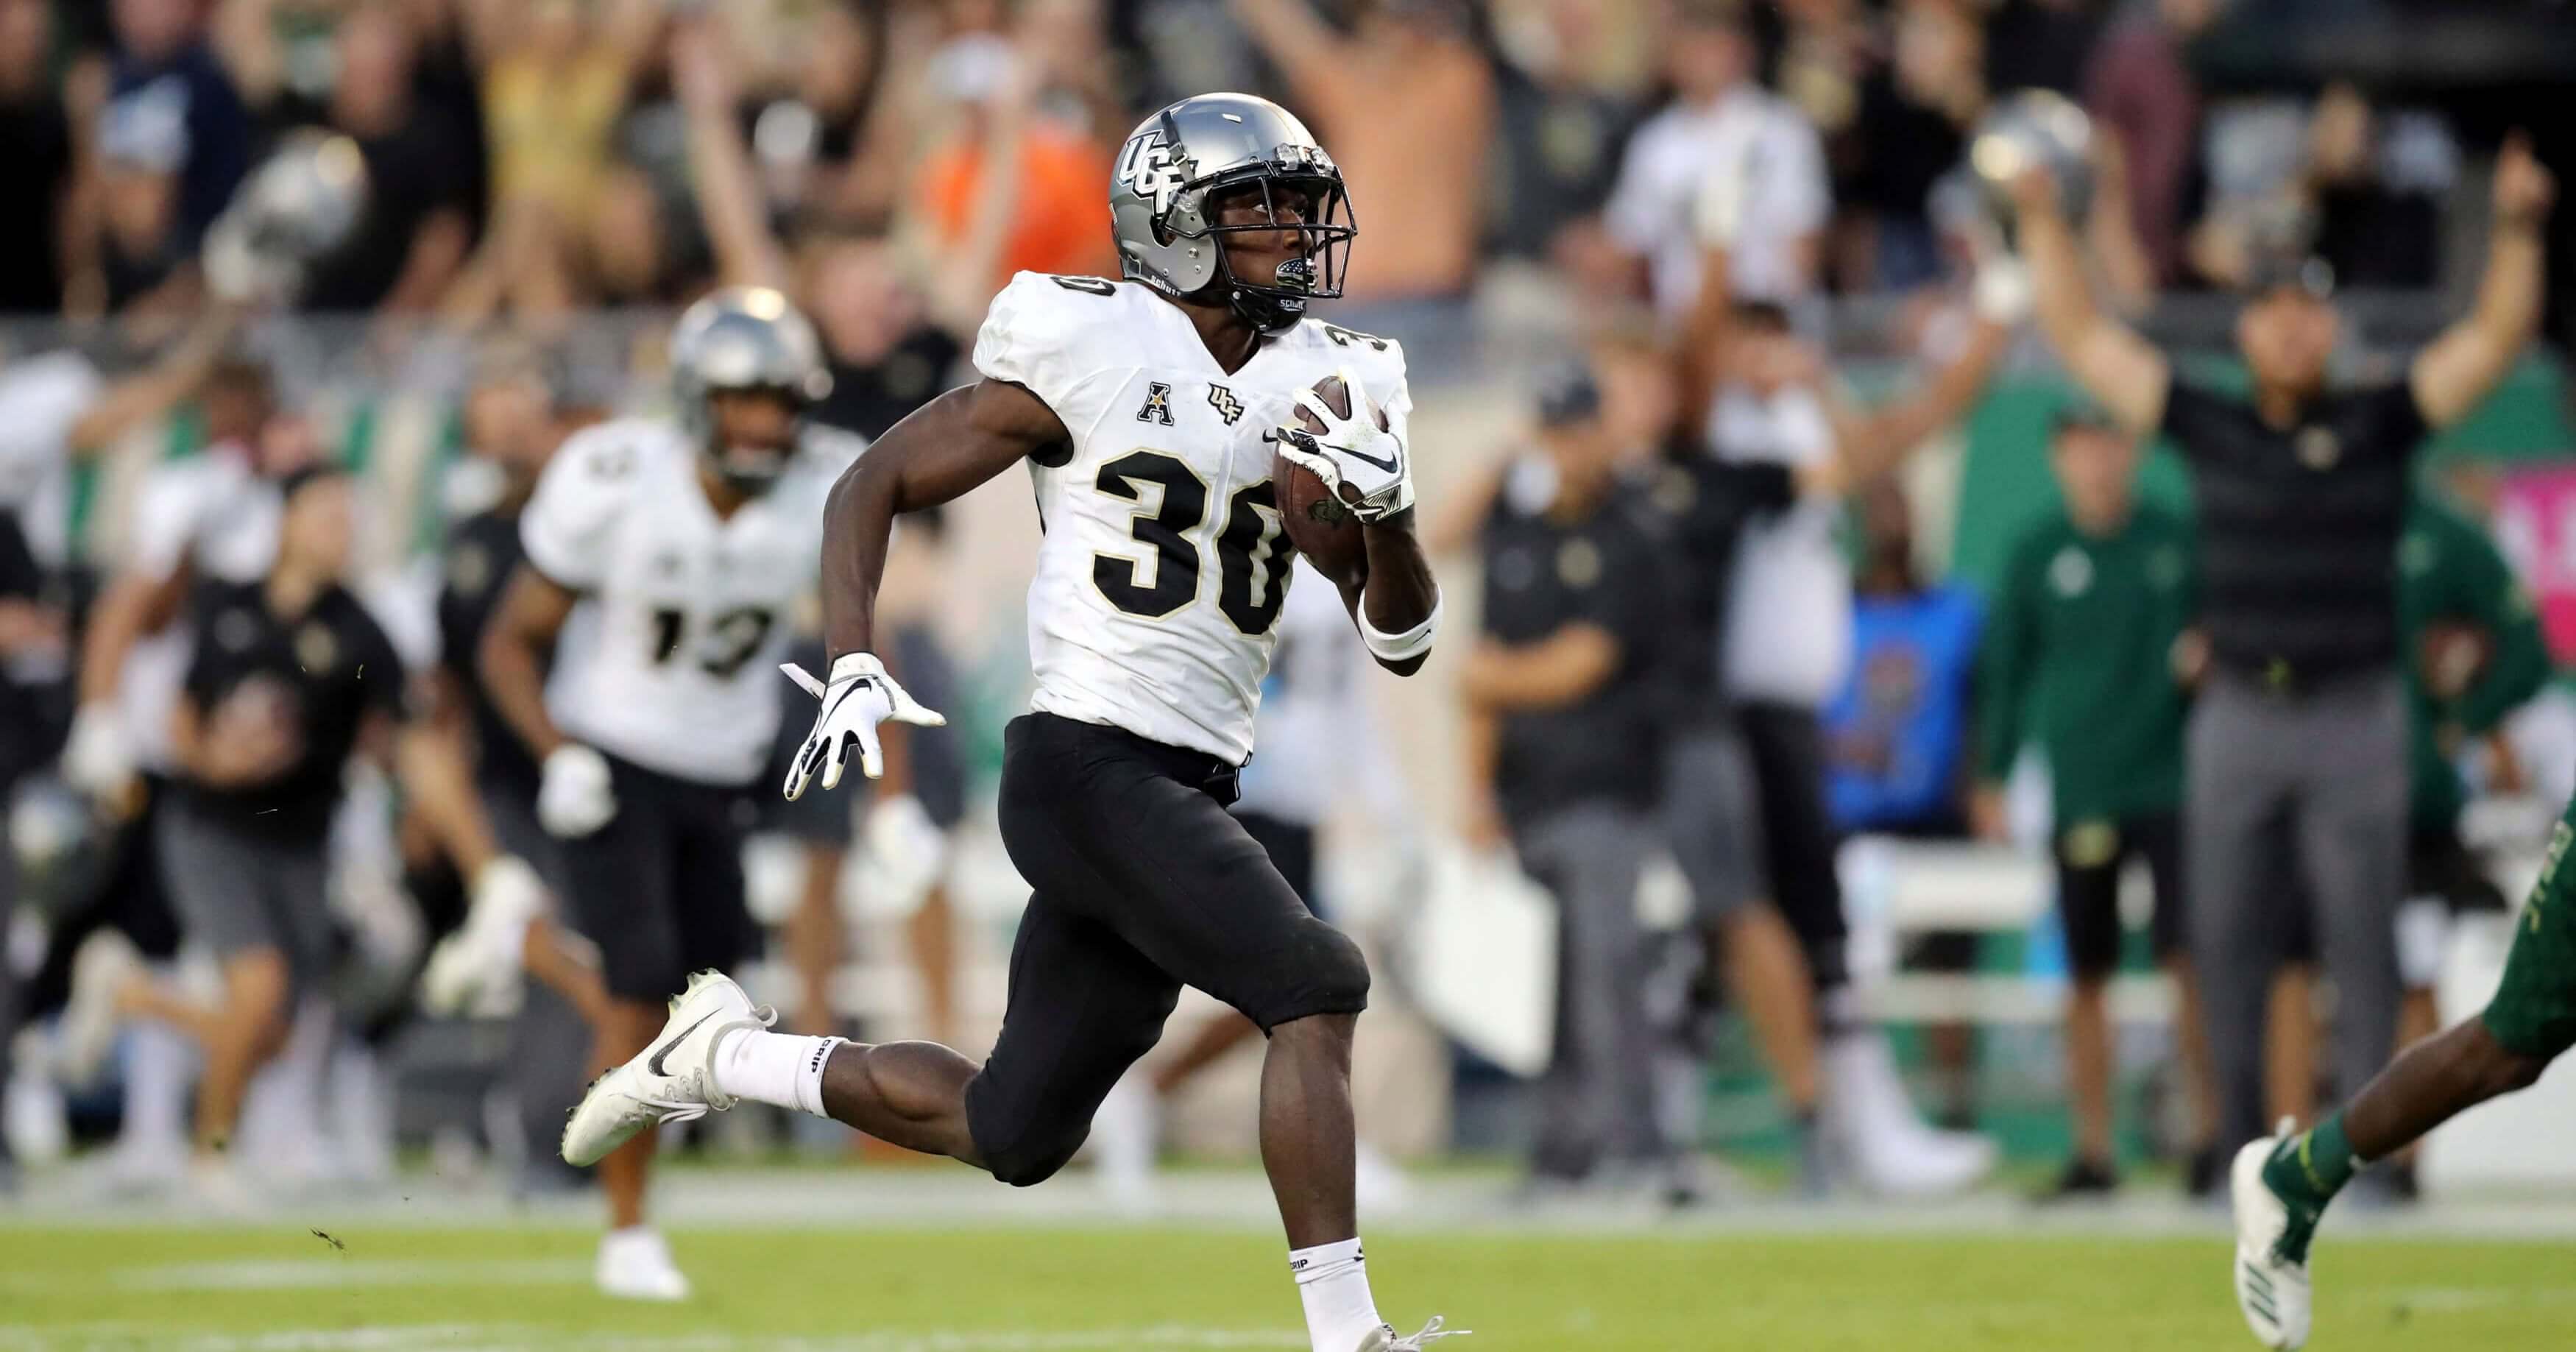 Central Florida's Greg McCrae breaks away to score a touchdown against South Florida during the first half Friday in Tampa.